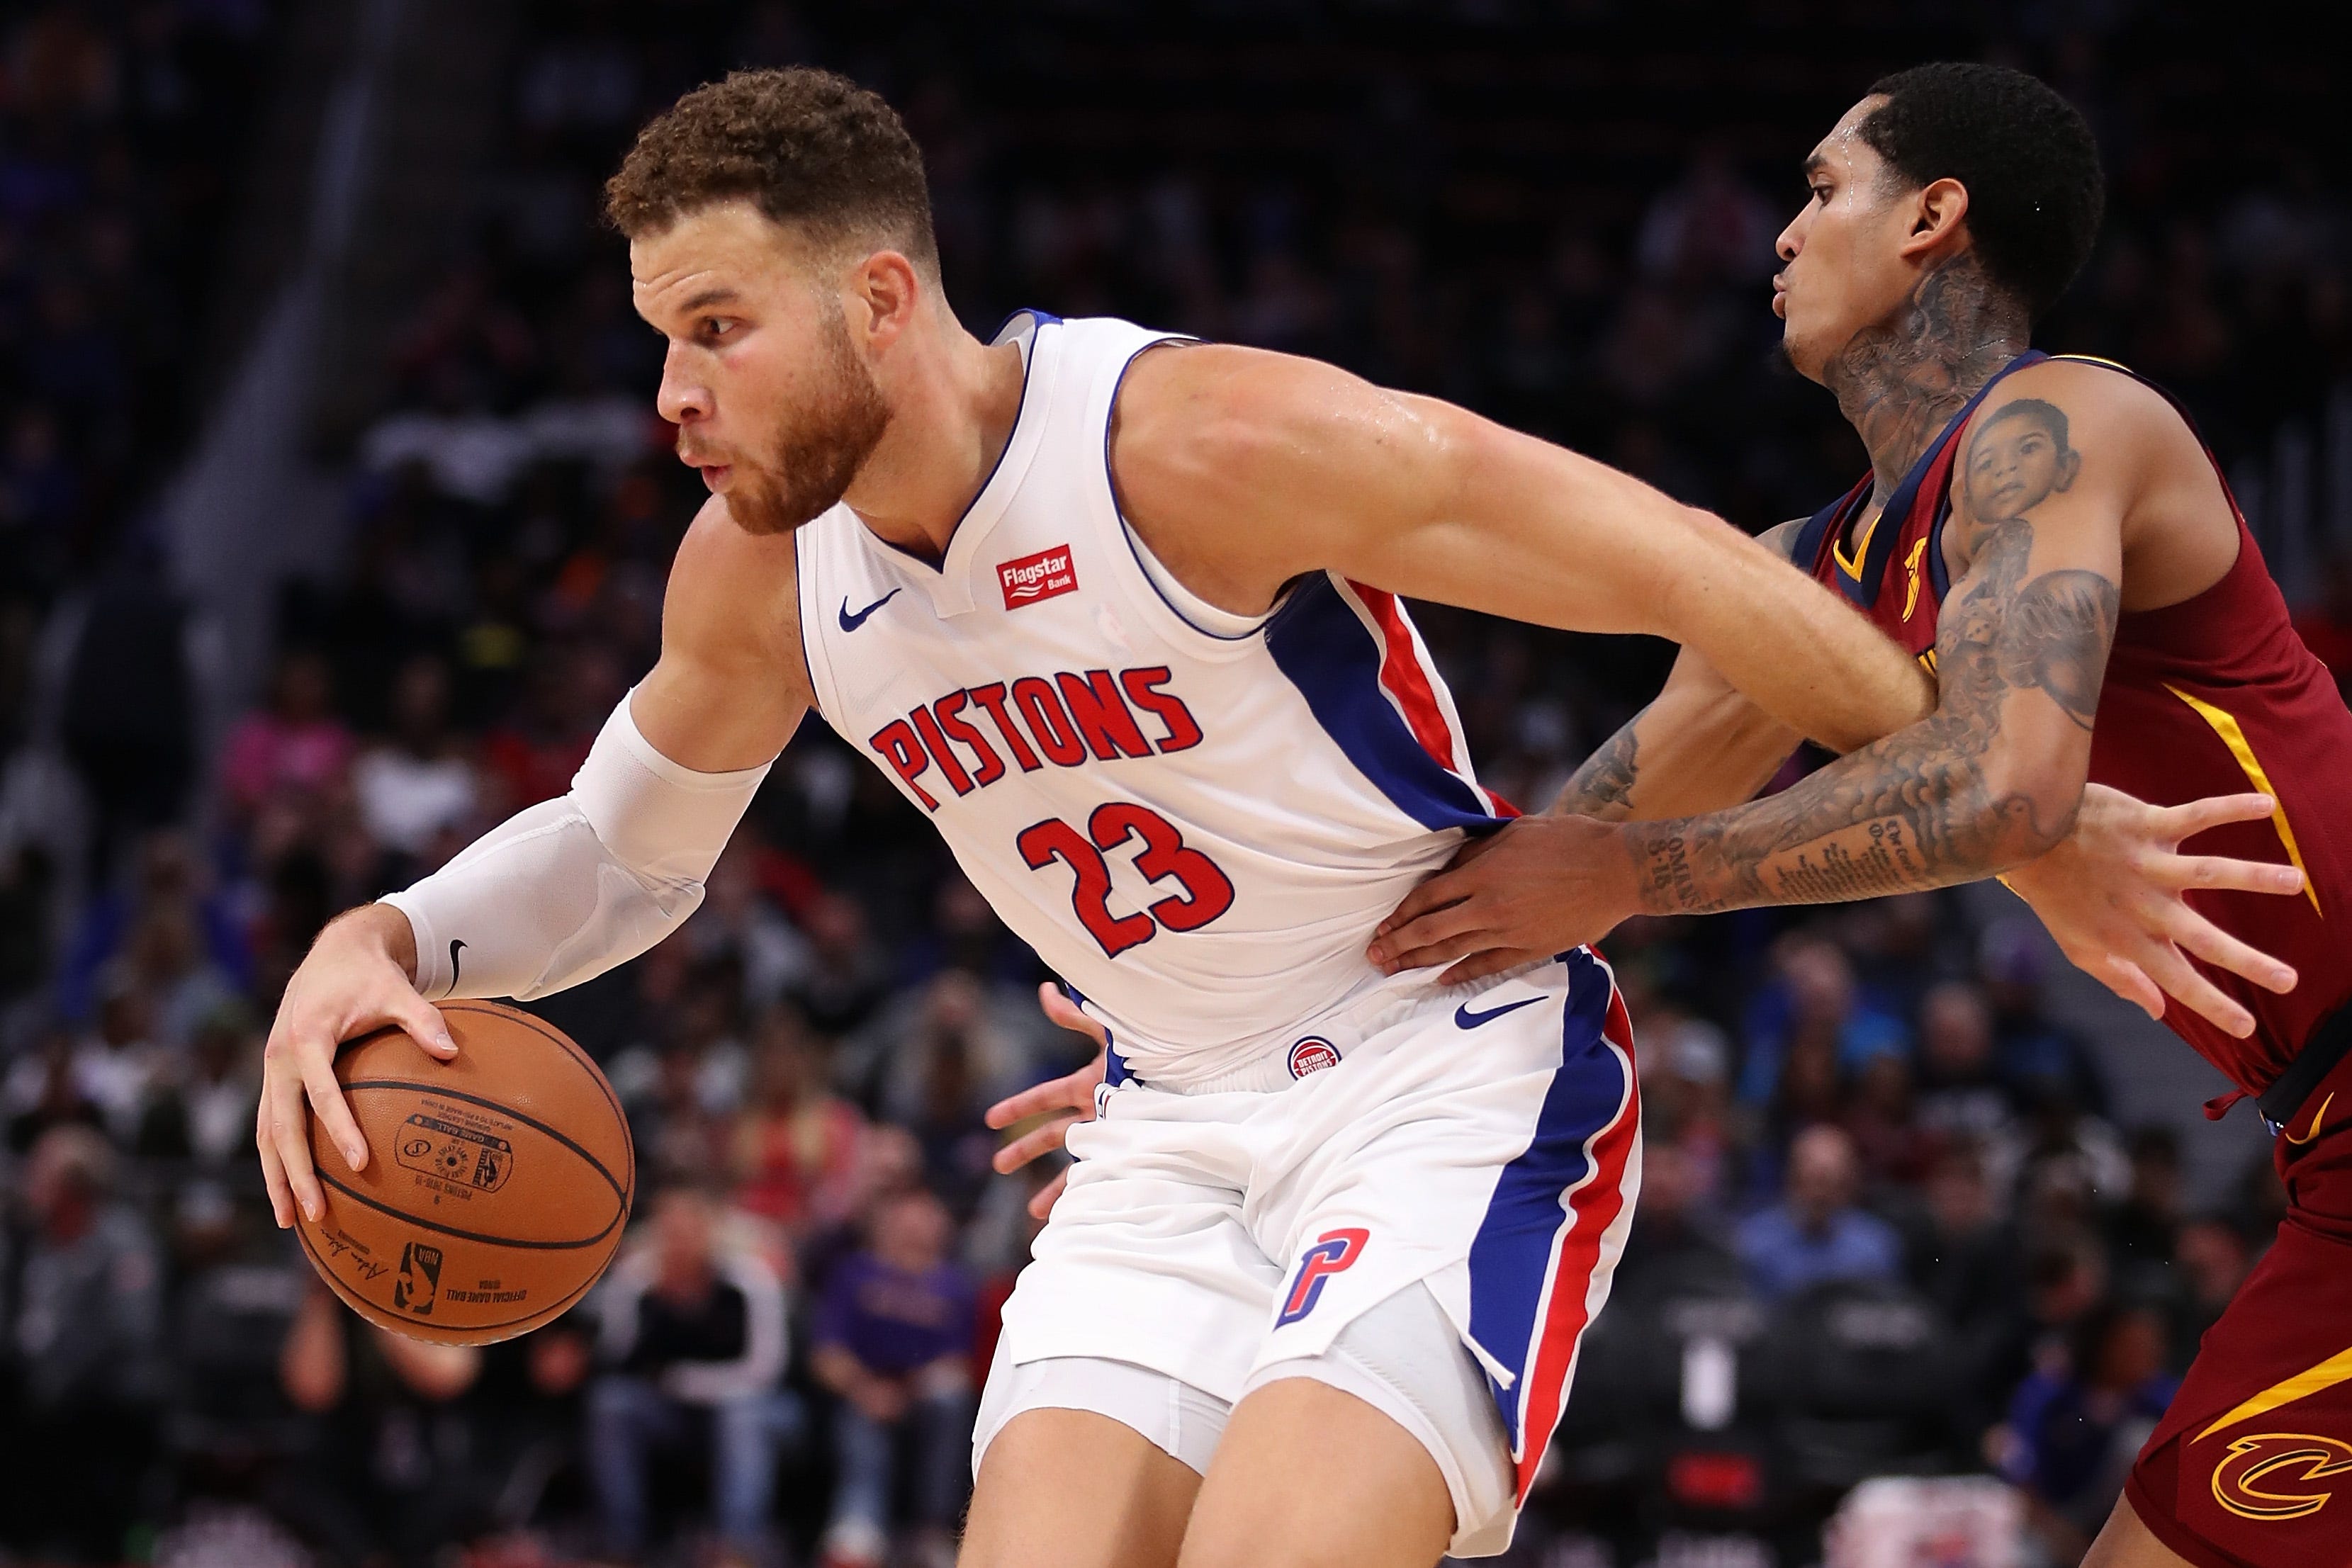 Blake Griffin (23) of the Detroit Pistons tries to escape the defense of Jordan Clarkson (8) of the Cleveland Cavaliers during the second half.